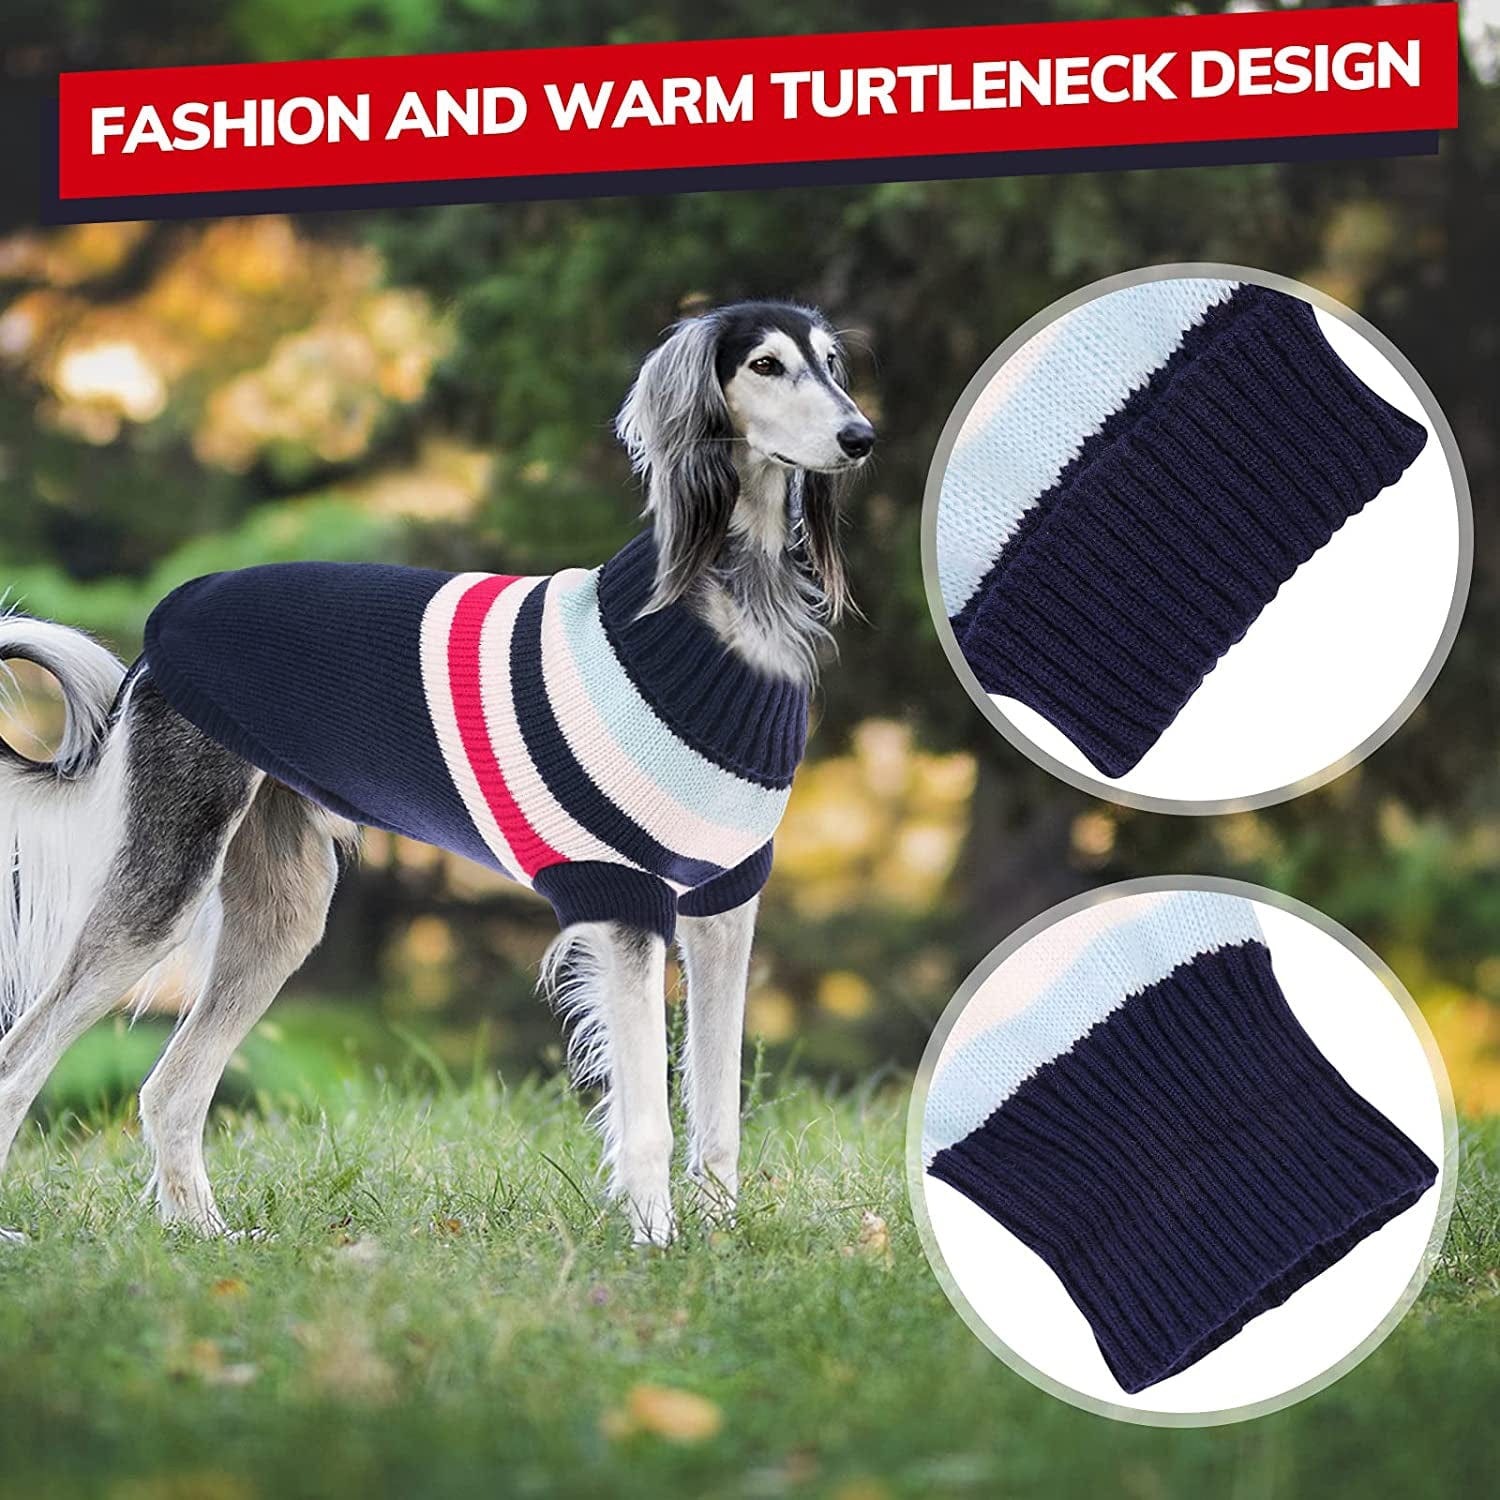 KUTKUT Dog Sweater | Warm Strip Dog Winter Knitwear Clothes with Elastic Leg Bands | Soft Acrylic Knitted Pet Pullover for Small Medium Large Doggy (Blue) - kutkutstyle